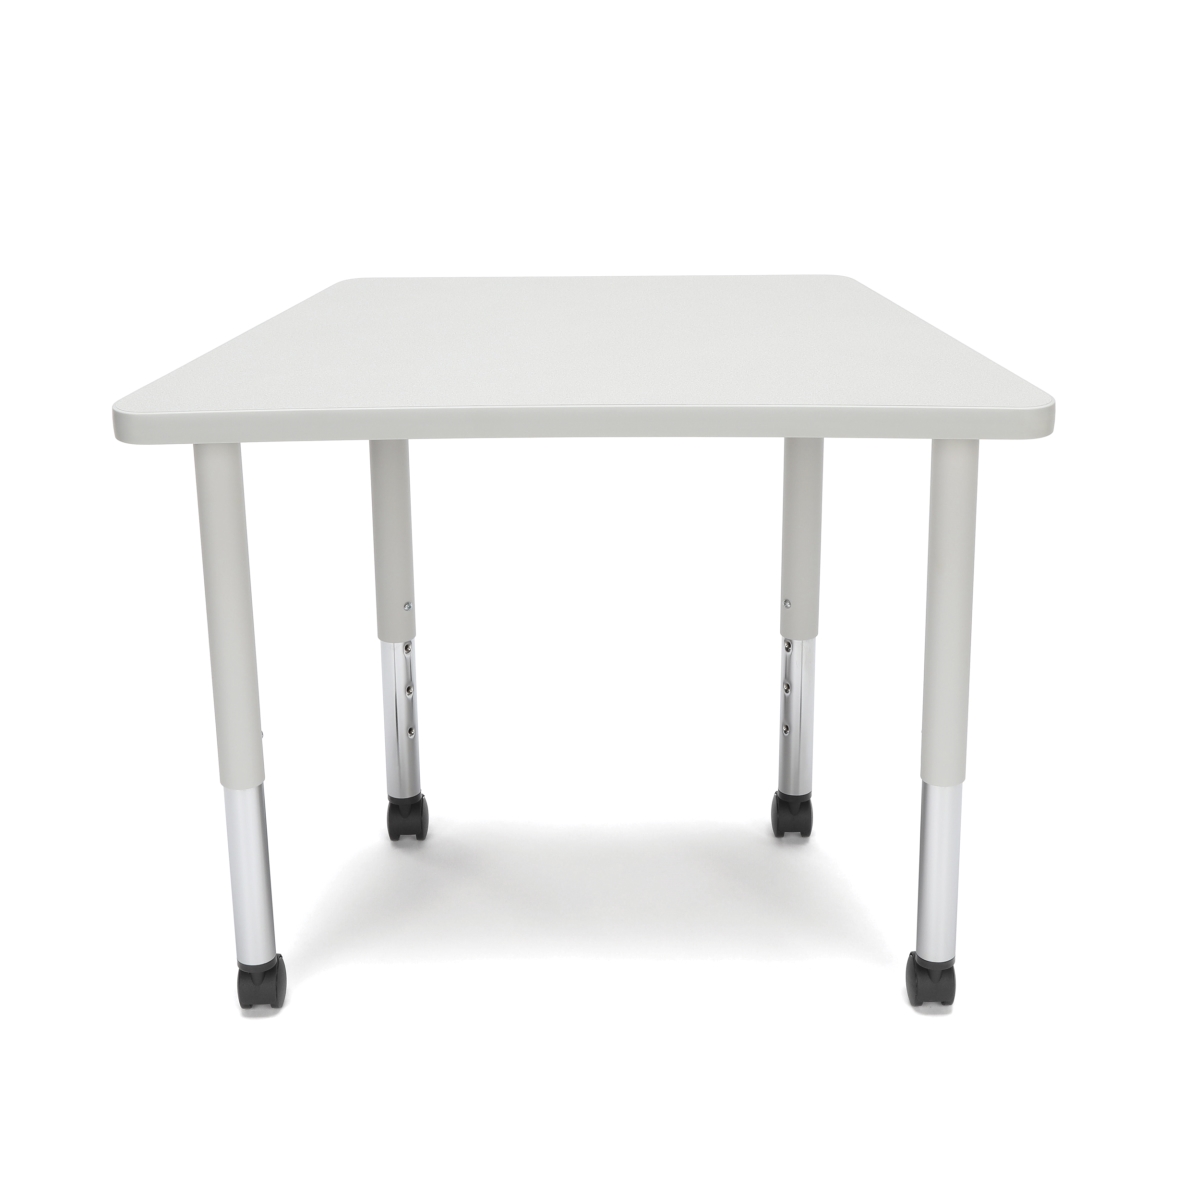 Trap-slc-grynb Adapt Series Trapezoid Student Table - 20-28 In. Height Adjustable Desk With Casters, Gray Nebula